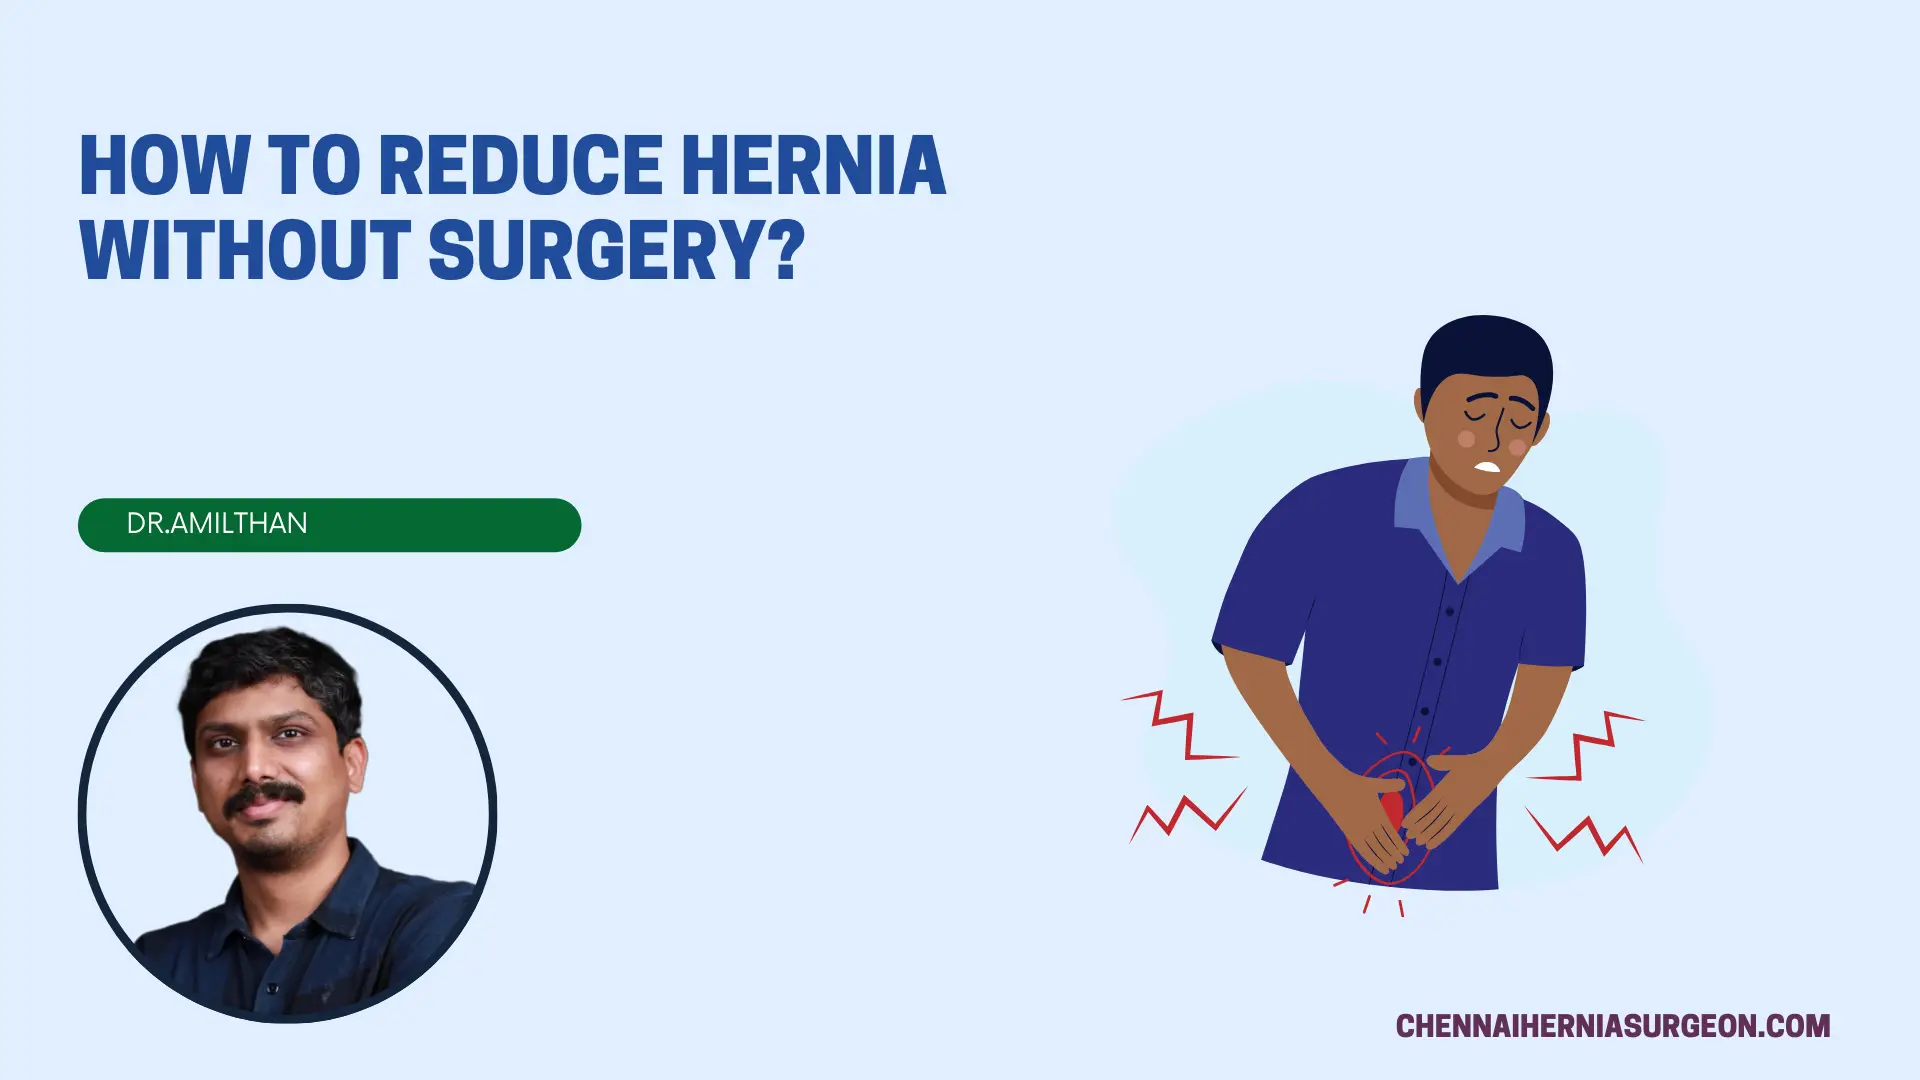 How to Reduce Hernia Without Surgery